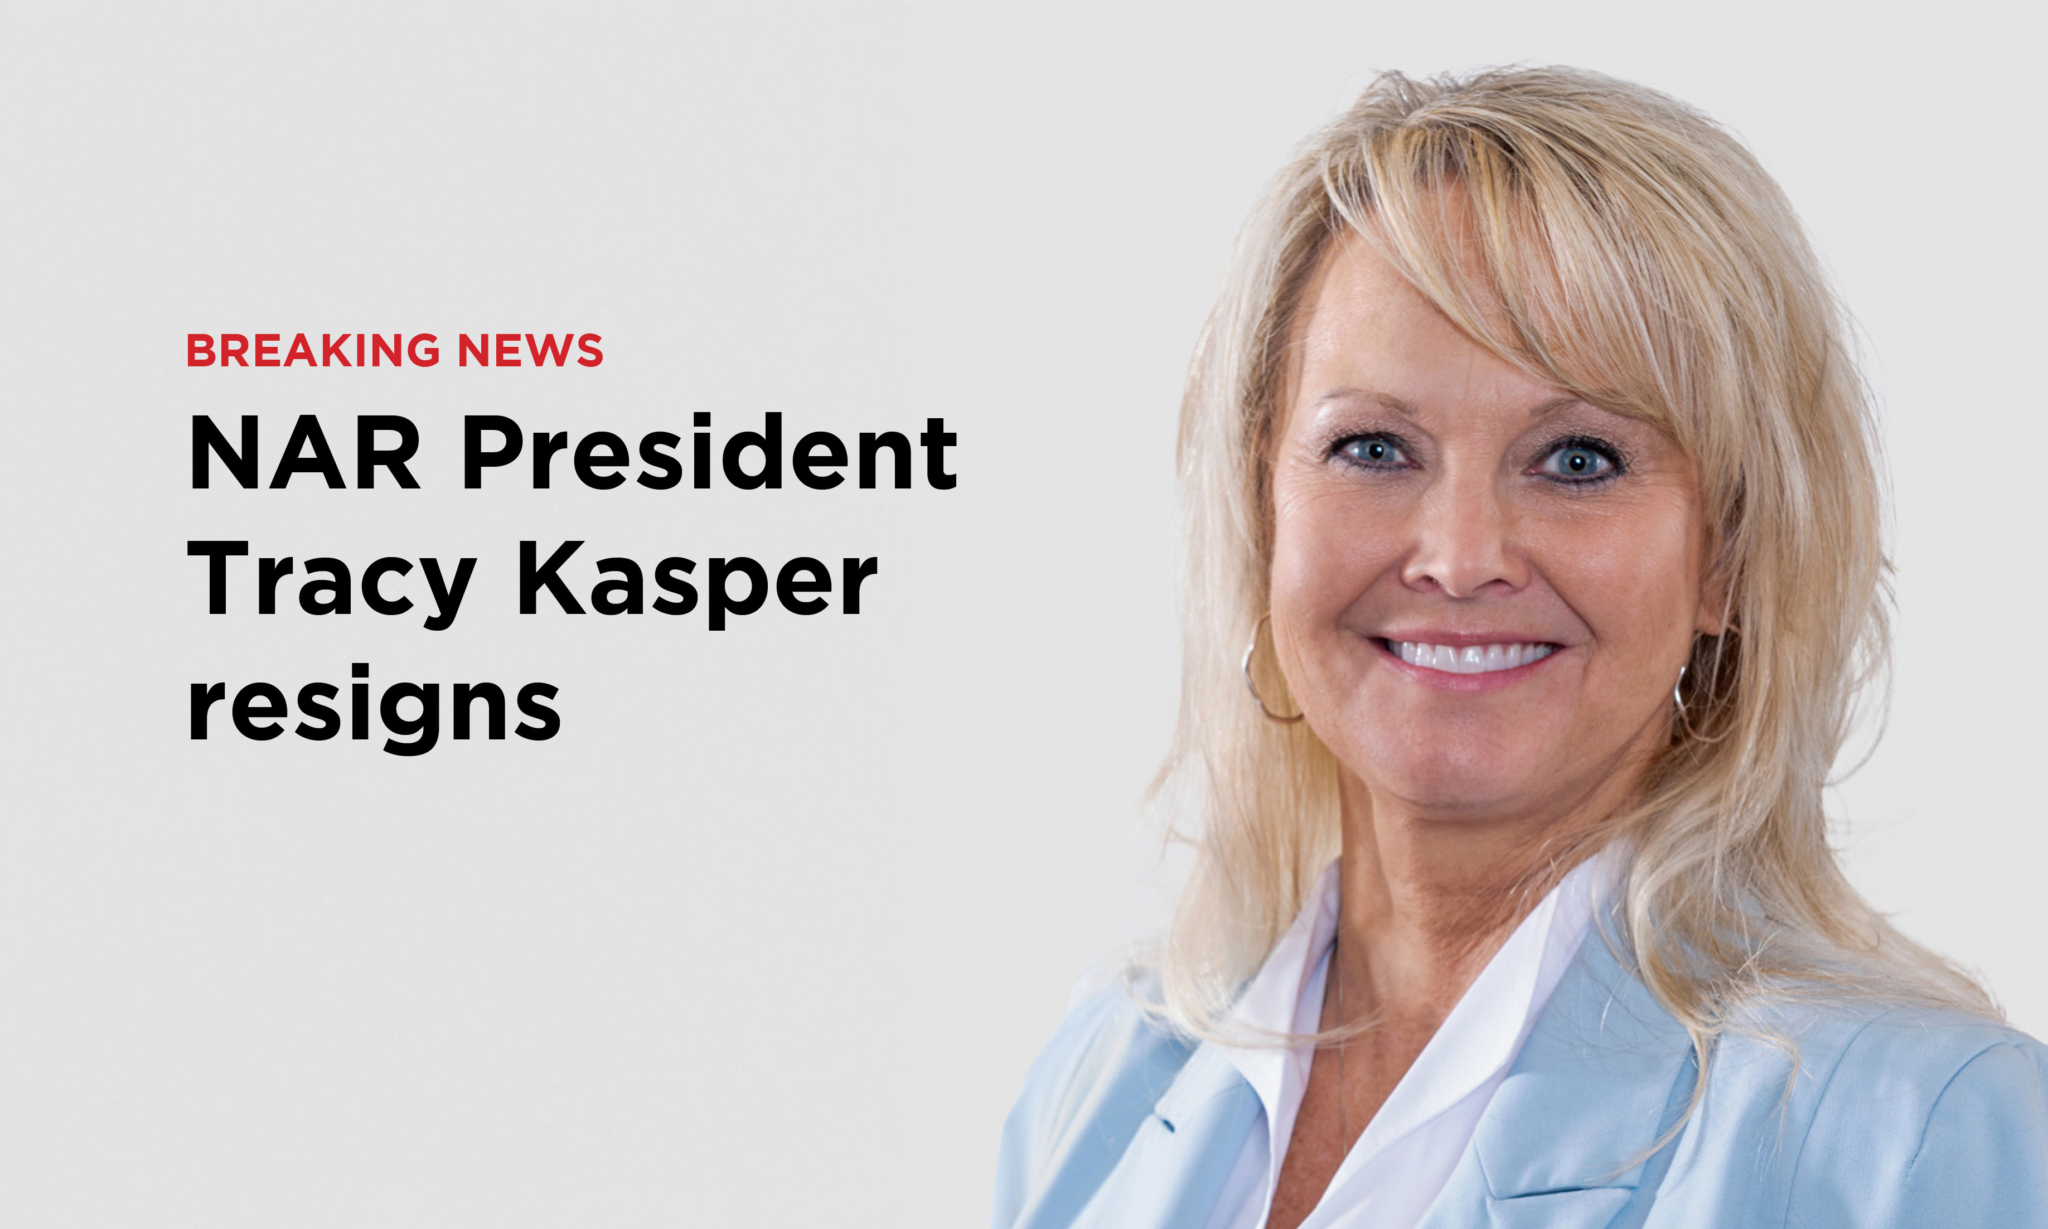 NAR President Tracy Kasper resigns after receiving threat to reveal